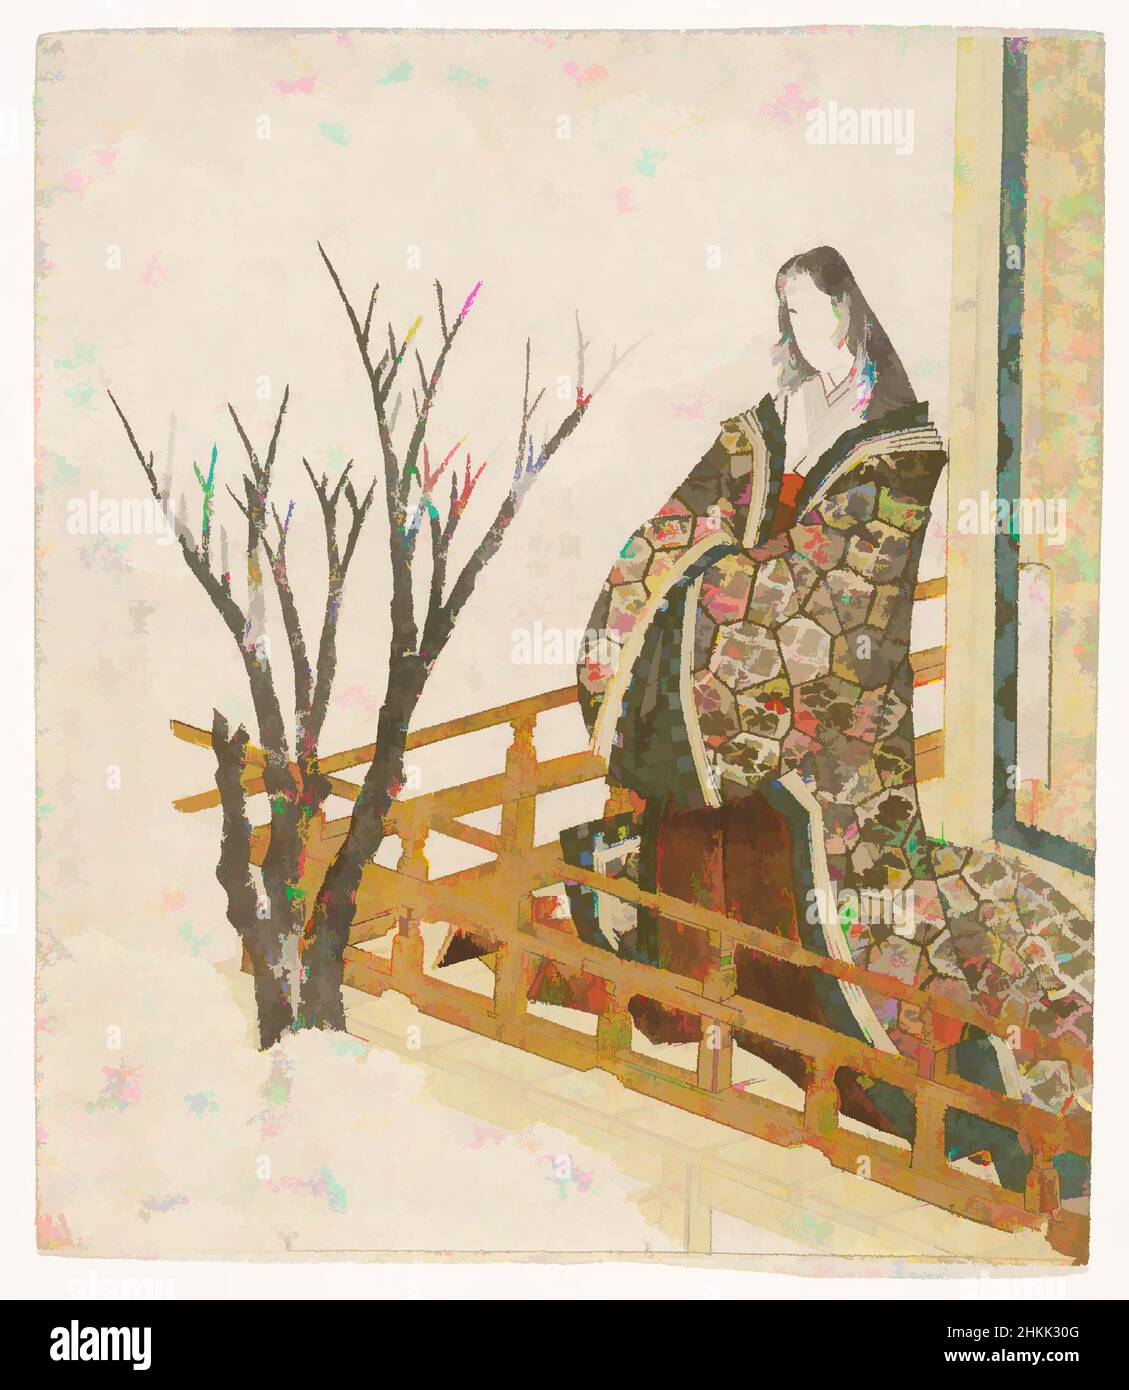 Art inspired by A Court Lady Viewing Cherry Blossoms, Yashima Gakutei, Japanese, 1786?-1868, Color woodblock print on paper, Japan, ca. 1822, Edo Period, Sheet: 8 3/8 x 7 1/4 in., 21.3 x 18.4 cm, balcony, cherry blossom, Lady, Classic works modernized by Artotop with a splash of modernity. Shapes, color and value, eye-catching visual impact on art. Emotions through freedom of artworks in a contemporary way. A timeless message pursuing a wildly creative new direction. Artists turning to the digital medium and creating the Artotop NFT Stock Photo